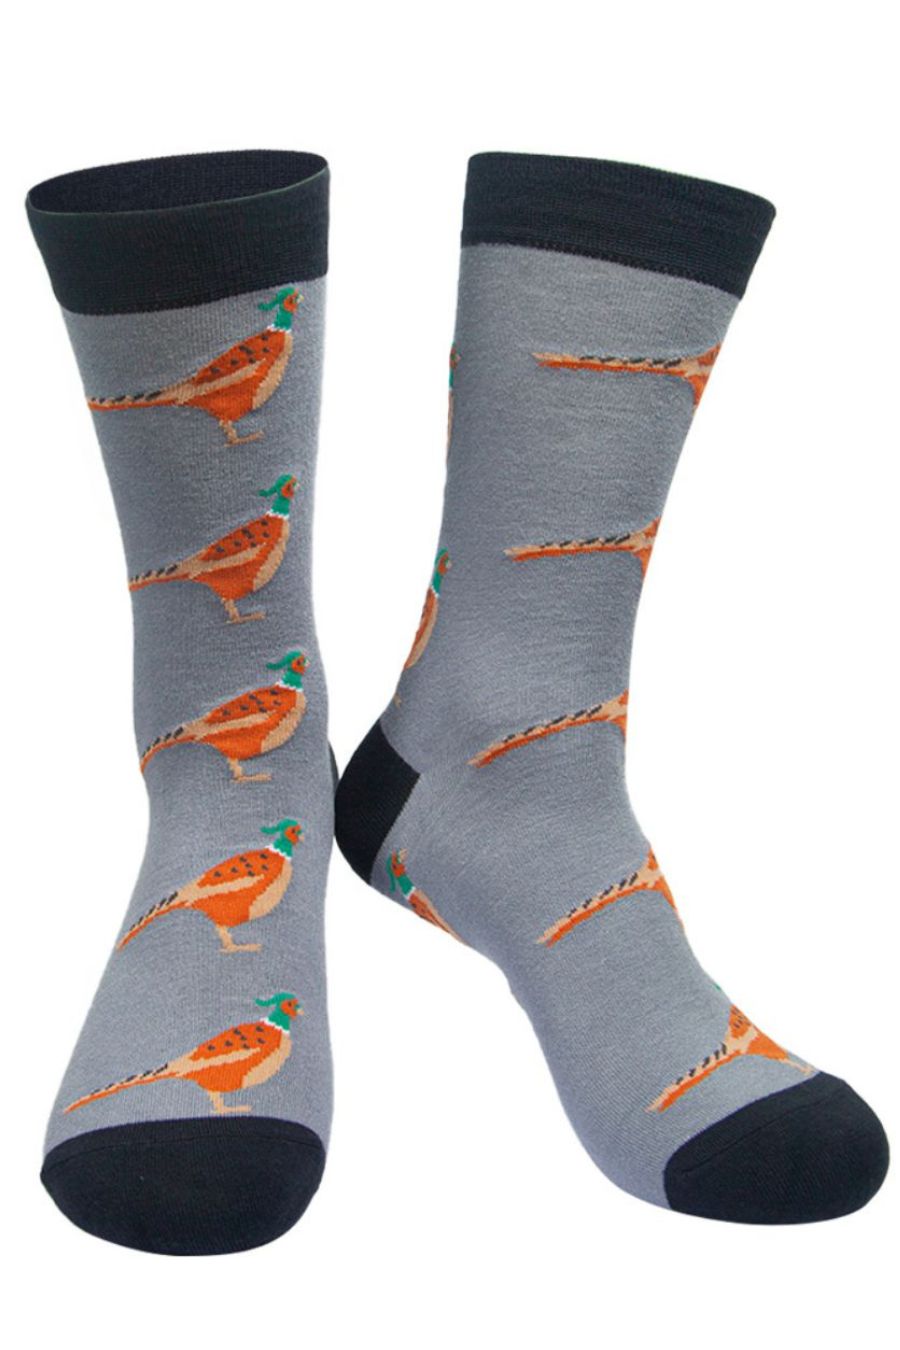 grey dress socks with an all over pattern of pheasant birds